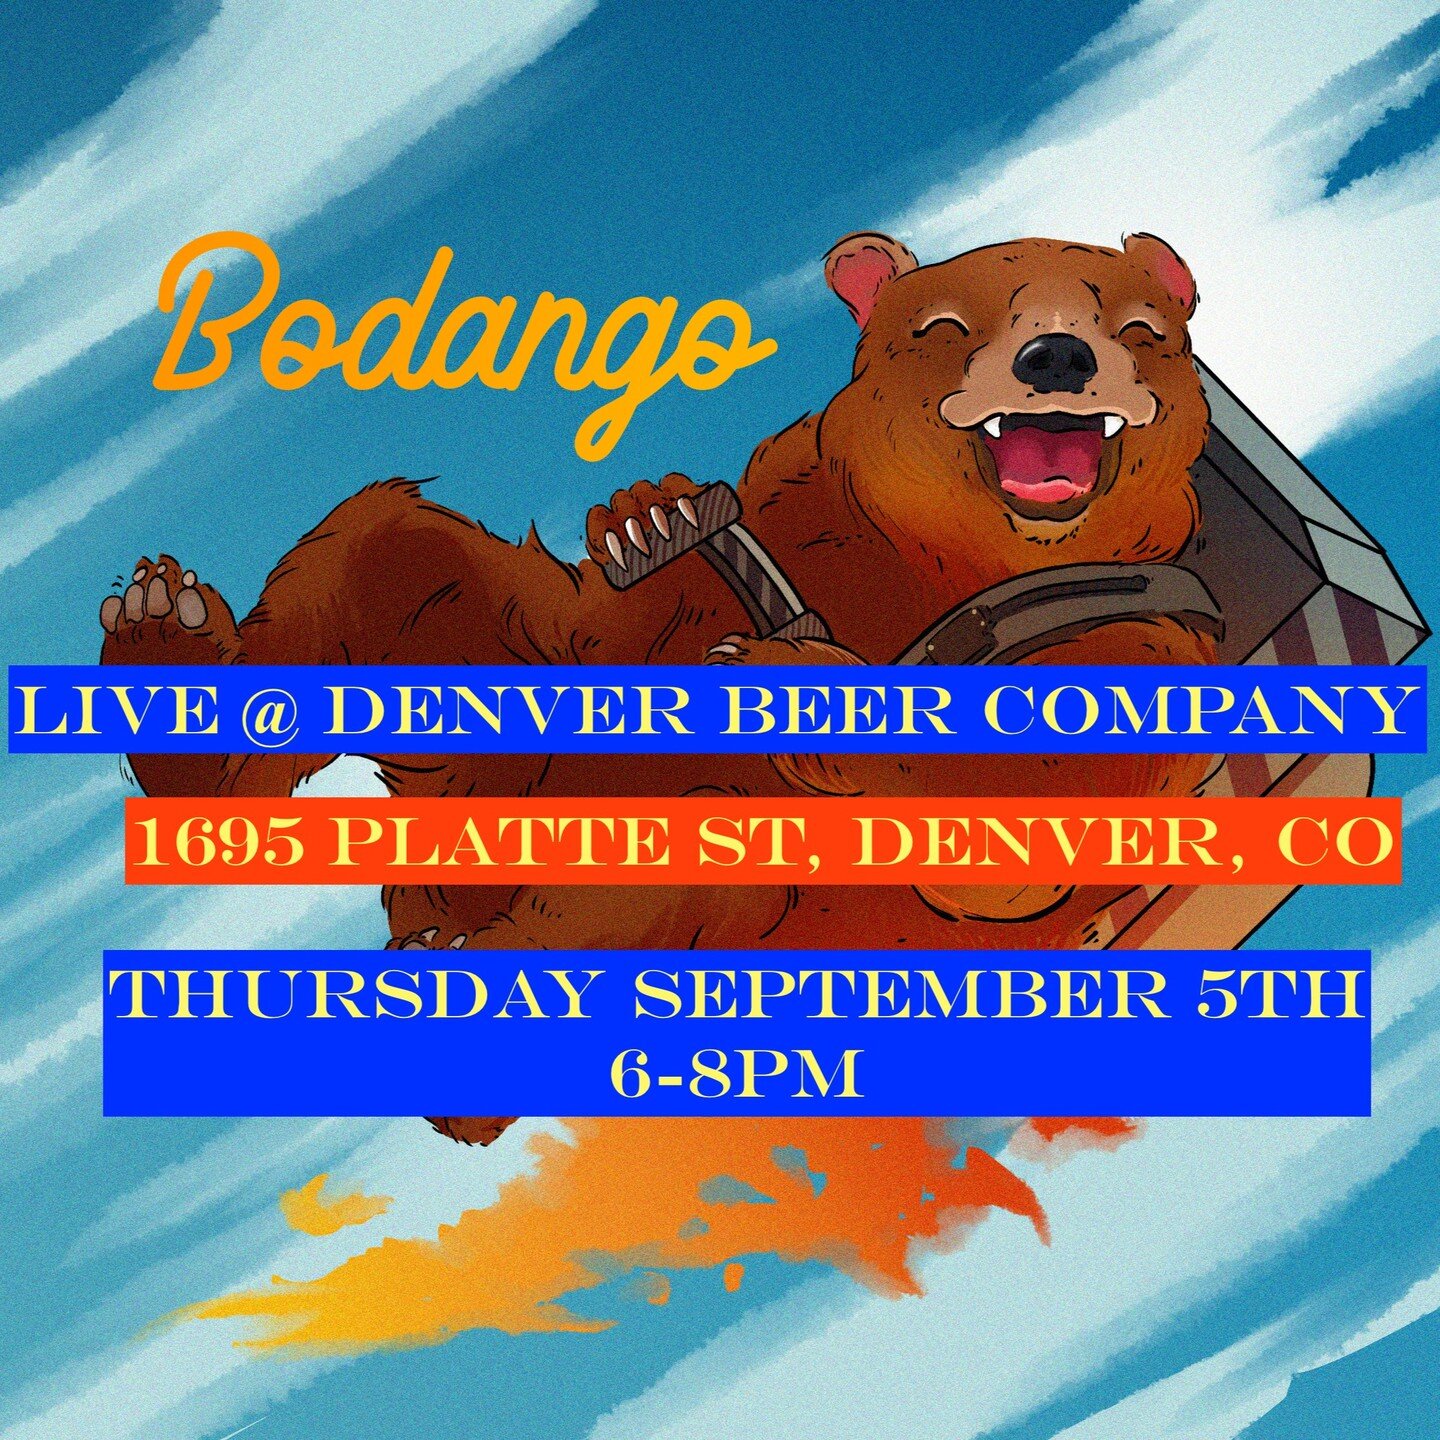 Come swing by for some late summer tunes at Denver Beer Company Platte Street!!!

Thursday September 5th, 6-8pm!!